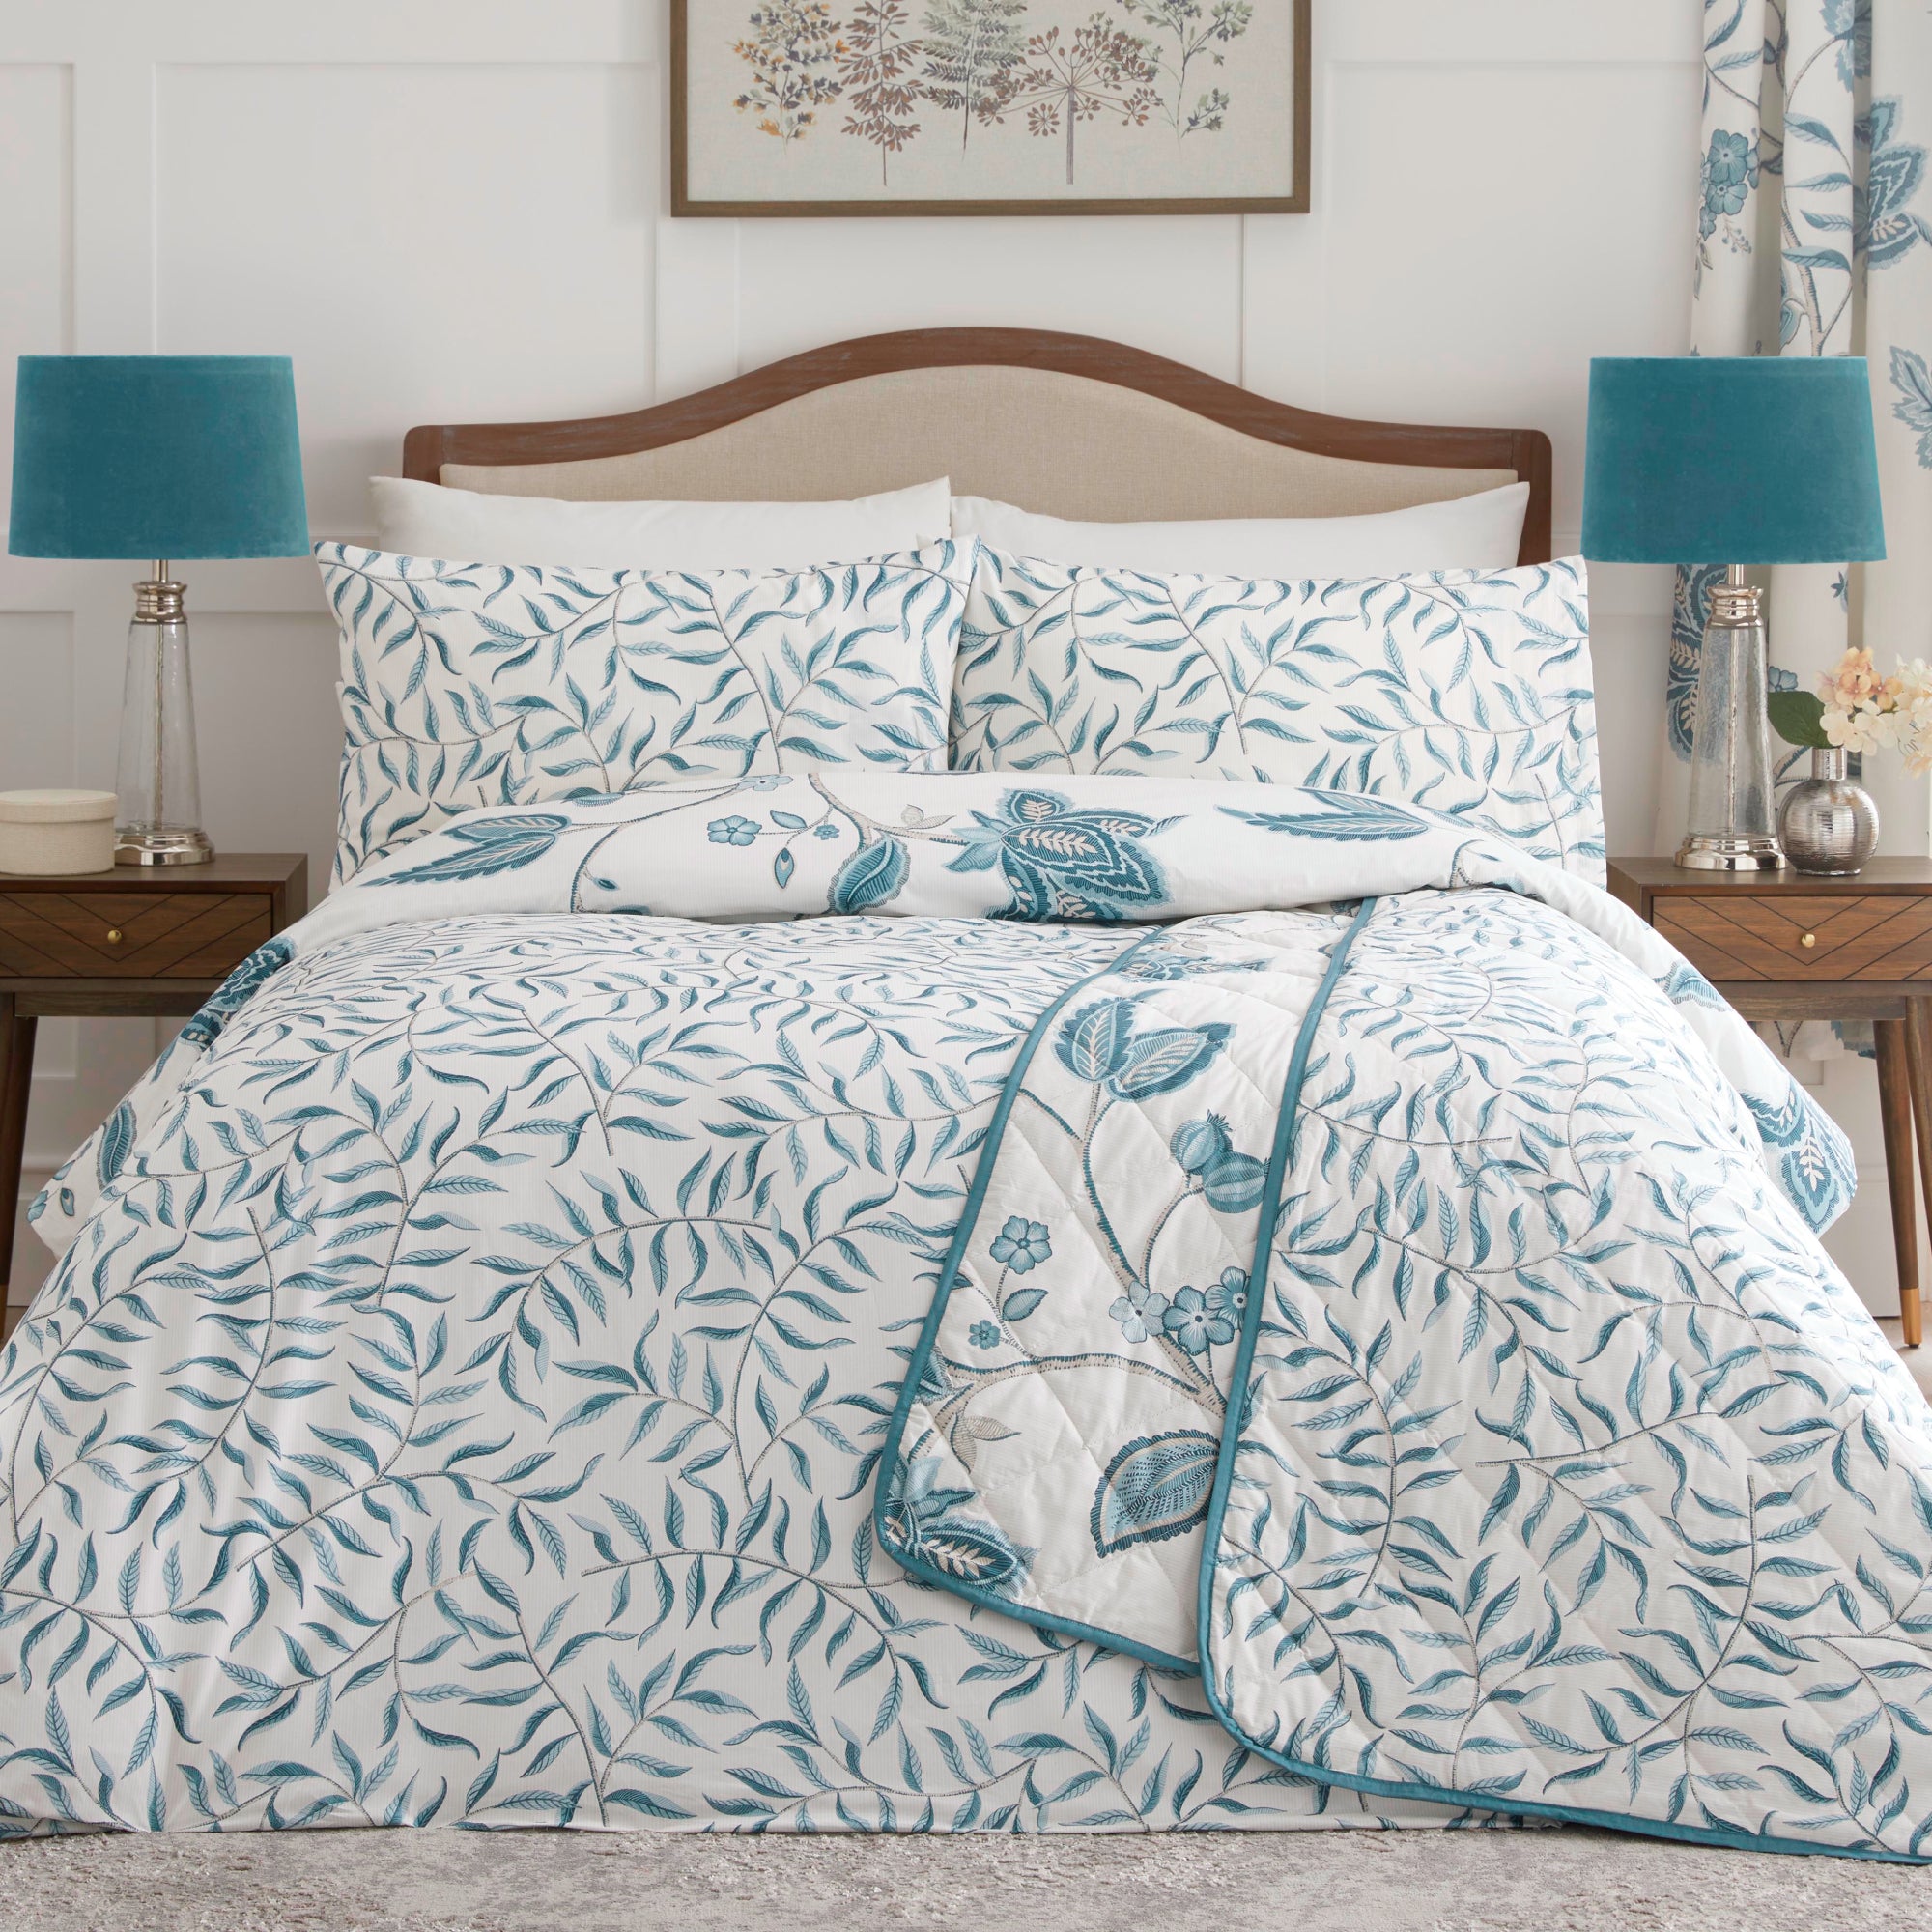 Duvet Cover Set Samira by Dreams And Drapes Design in Teal